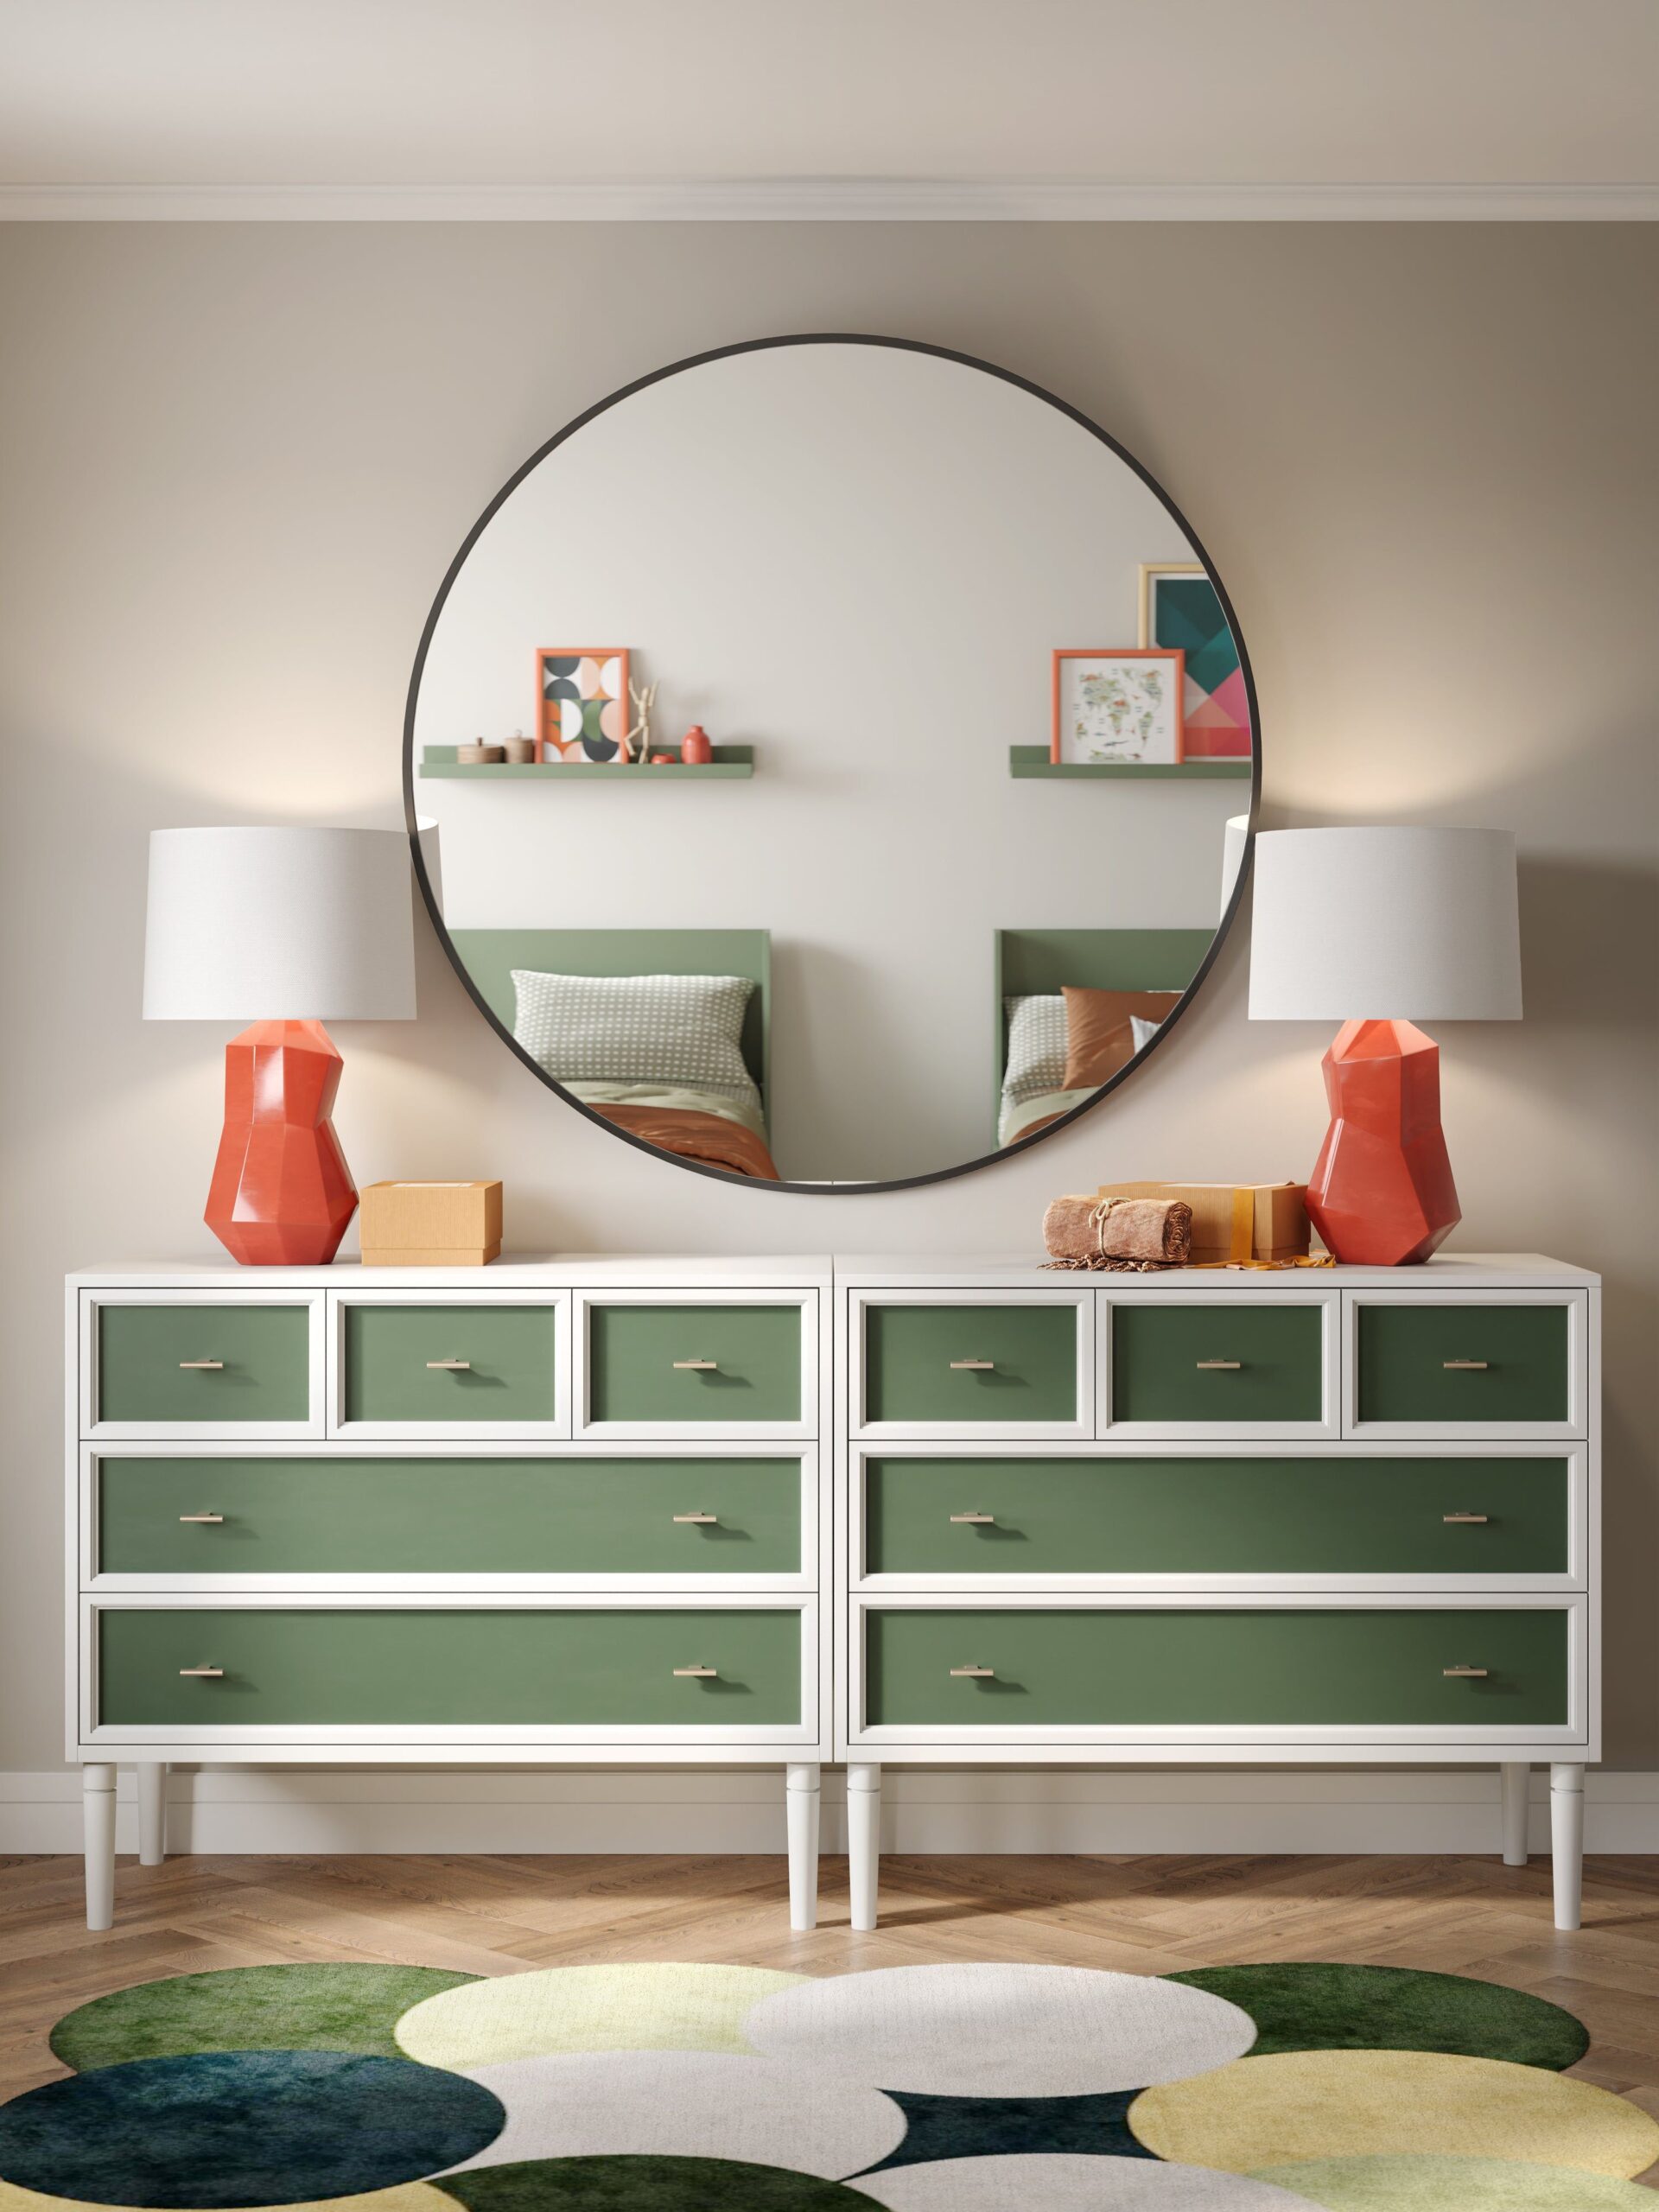 The Essential Piece for Kids’ Bedroom Organization – The Dresser